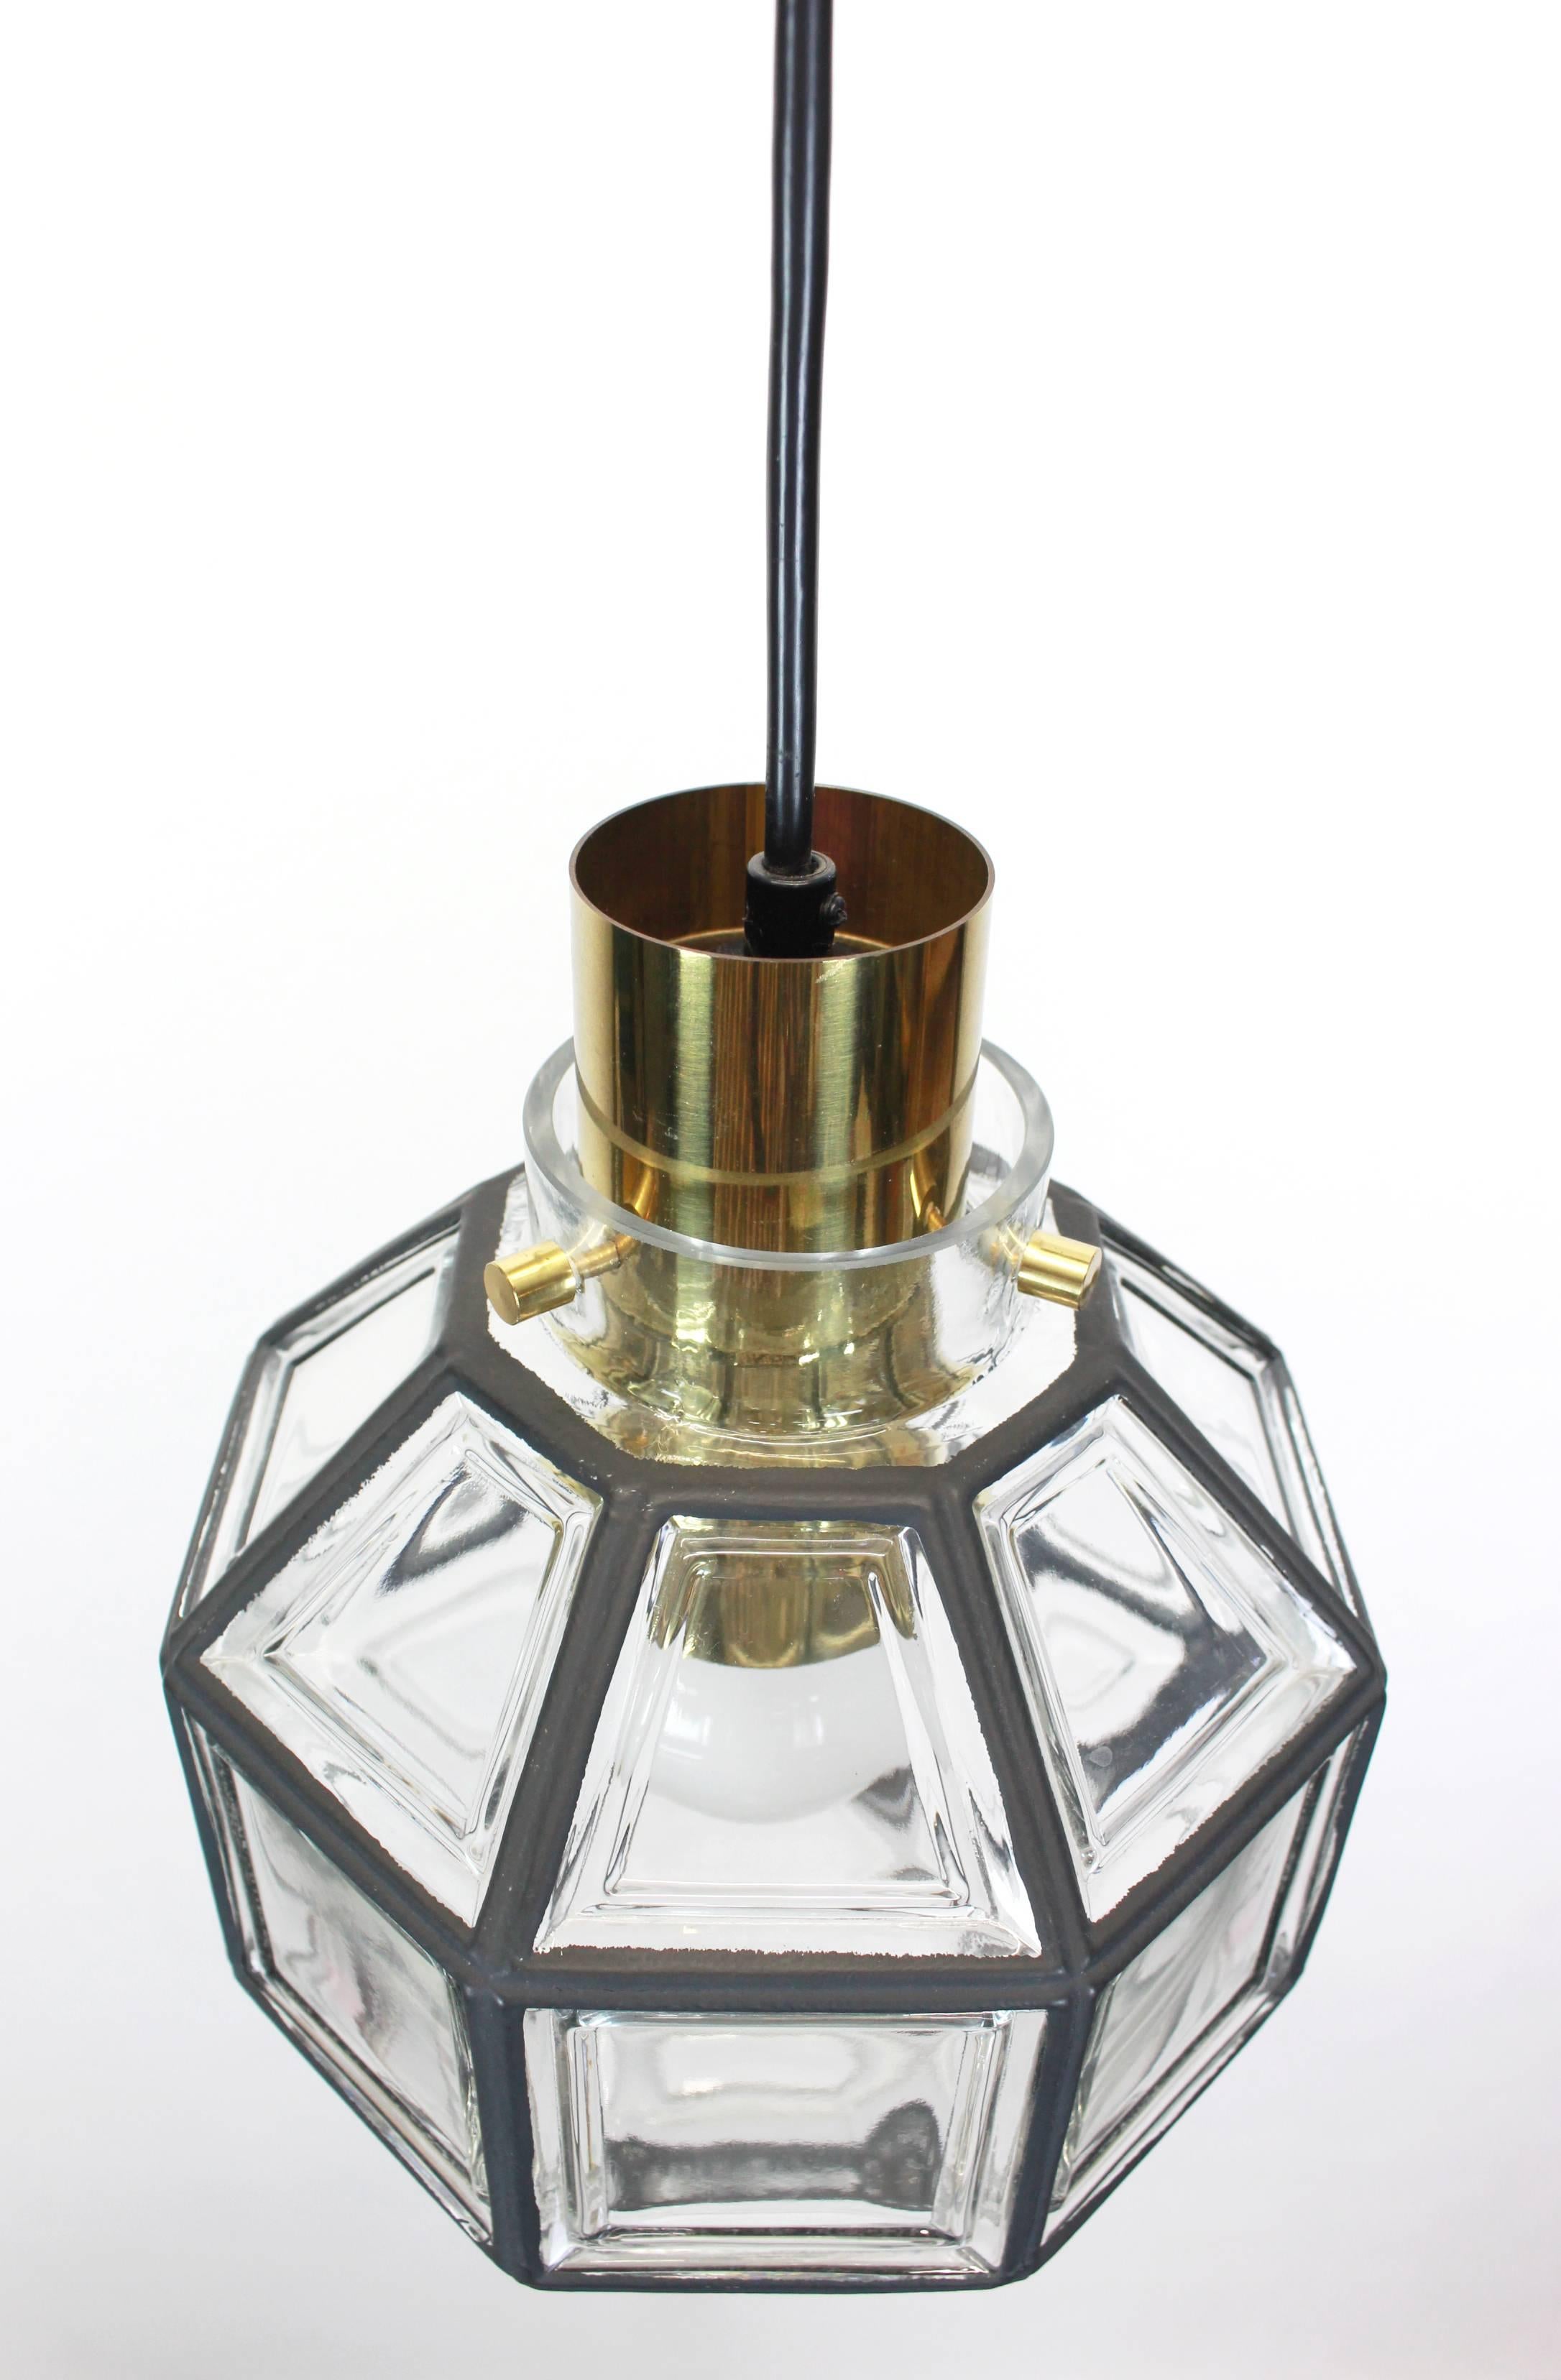 Minimalist iron and clear glass pendant light manufactured by Limburg Glashütte, Germany, circa 1960-1969. Octagonal shaped lantern and multi-faceted clear glass.

High quality and in very good condition. Cleaned, well-wired and ready to use. 

The